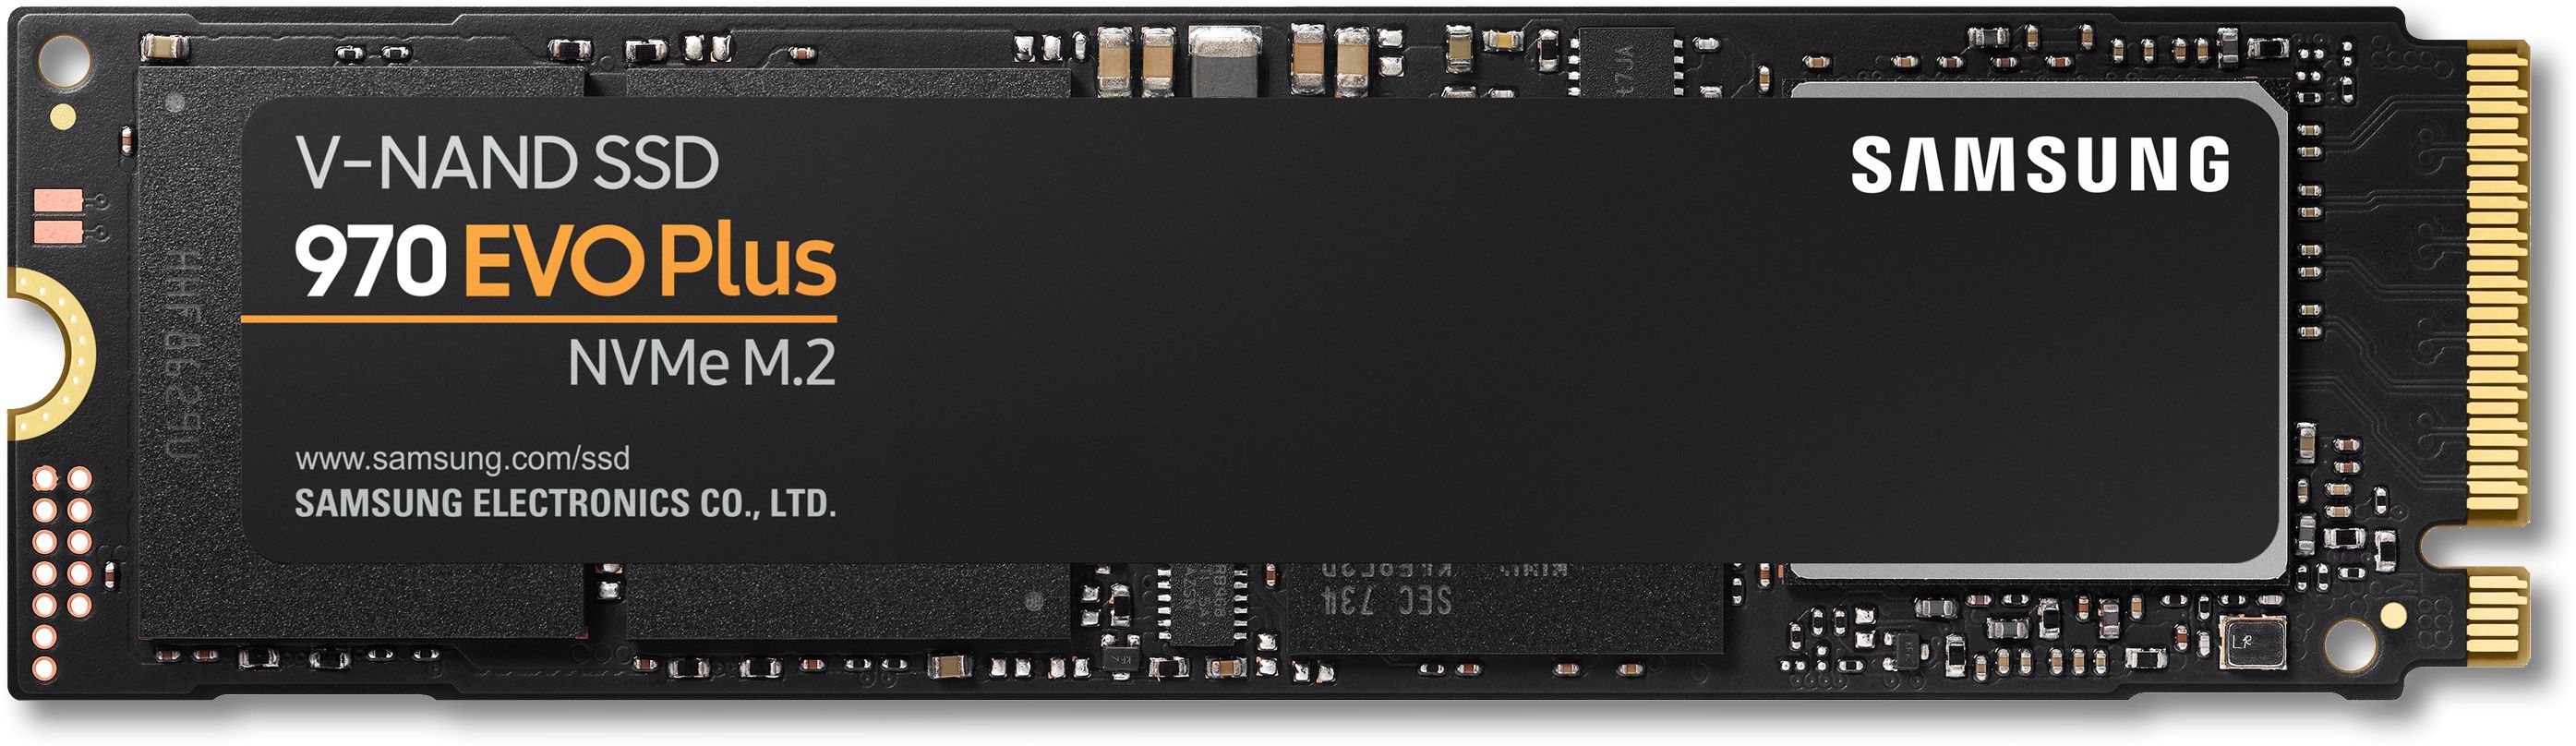 Samsung 970 EVO Plus NVMe M.2 Solid State Drives